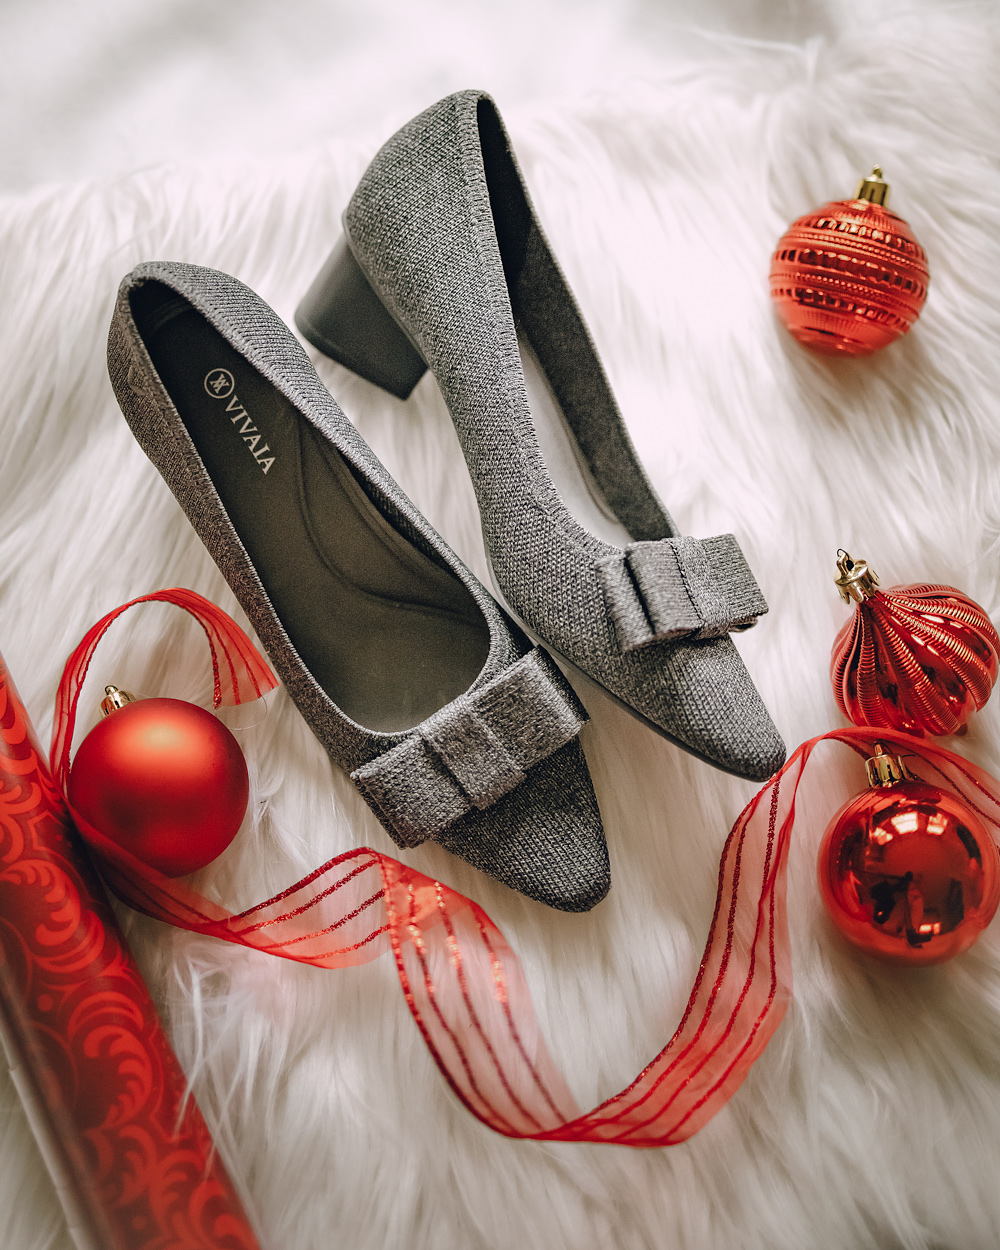 VIVAIA Shoes give the Gift of Sustainability